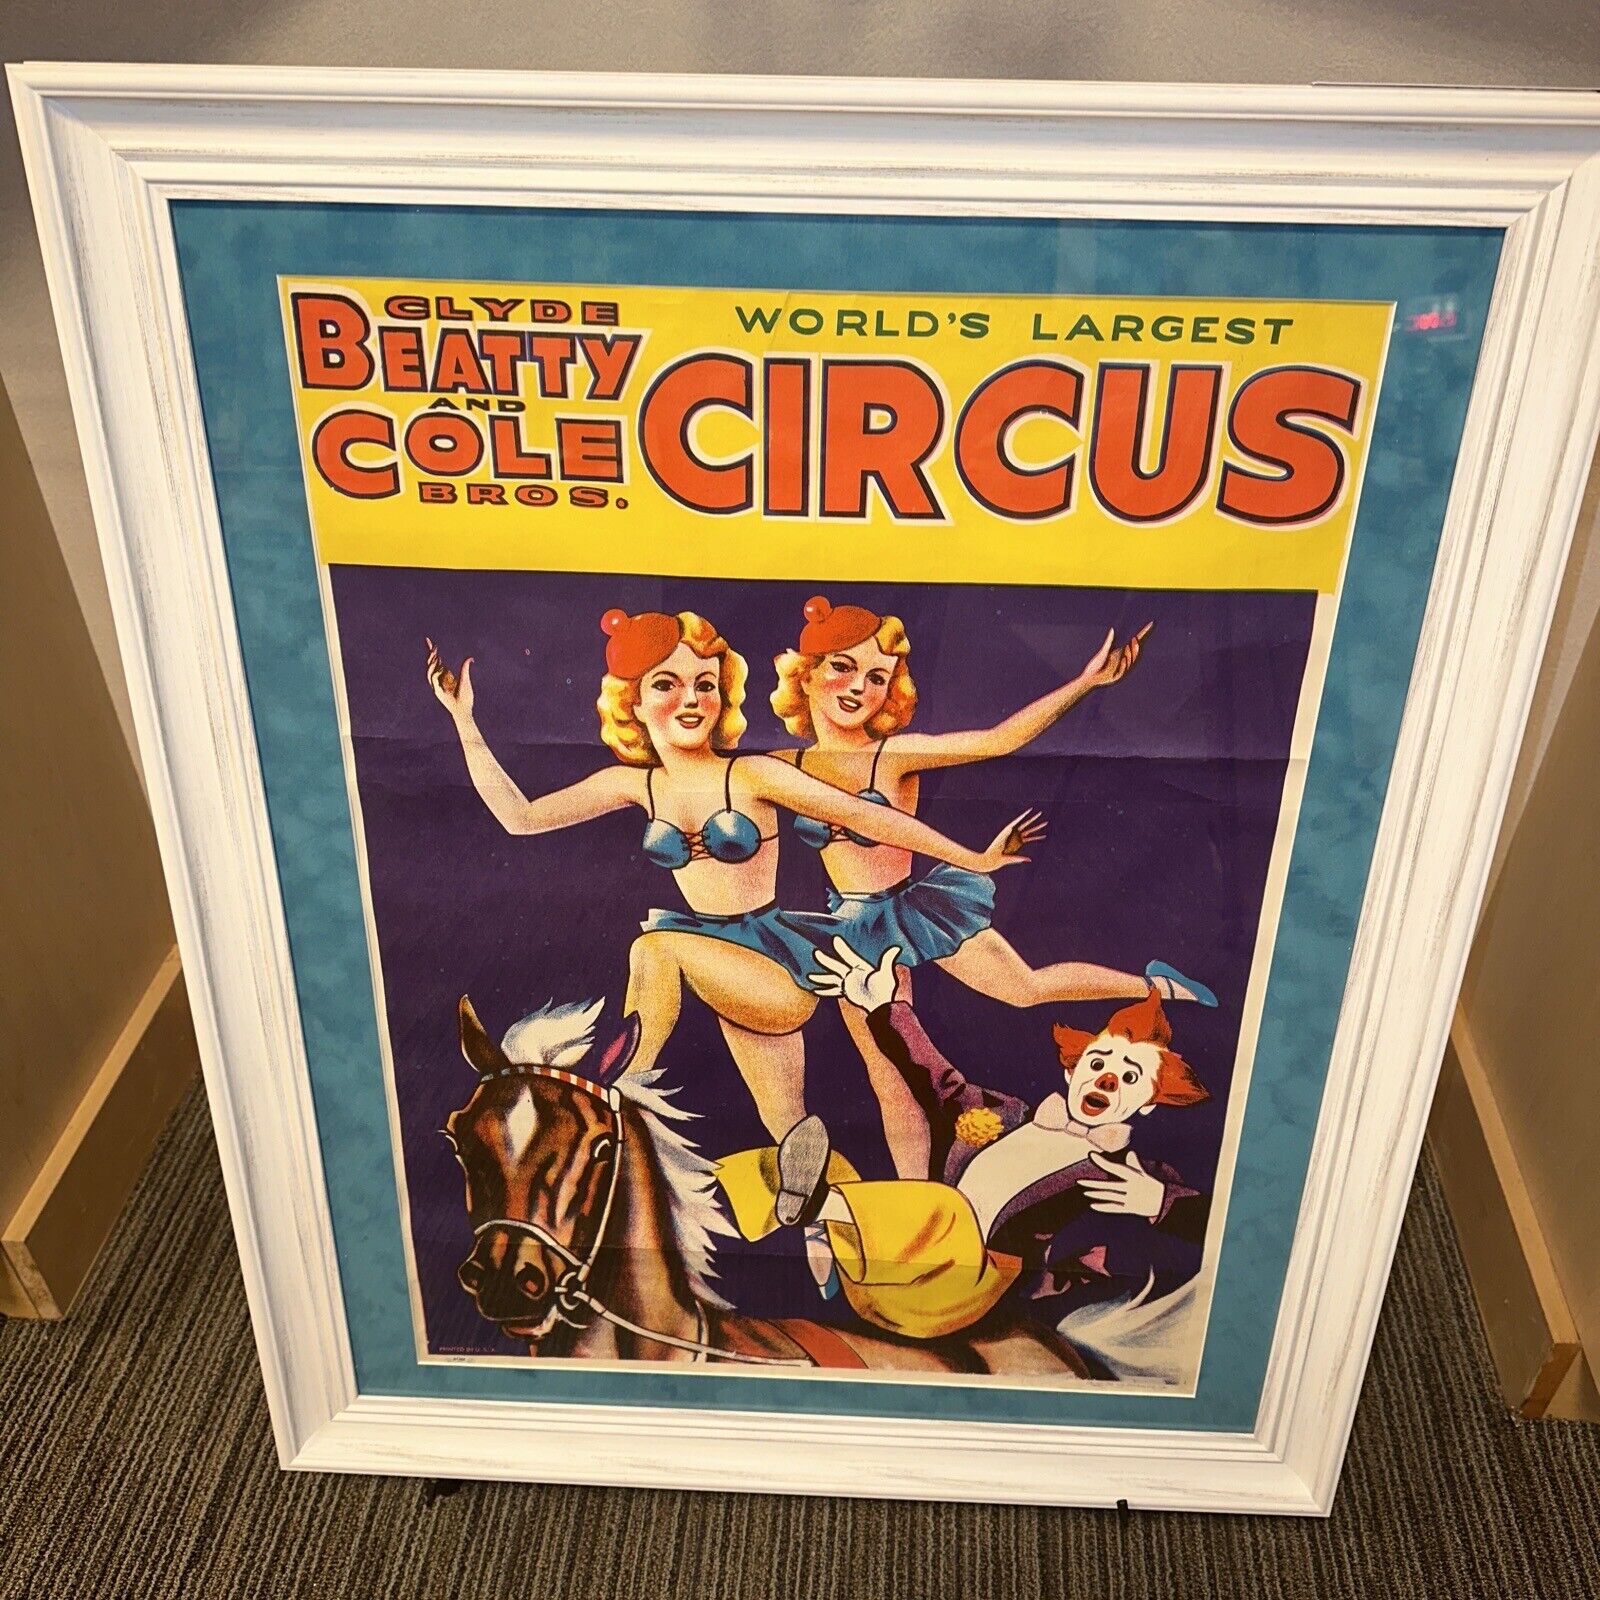 Circus Original Poster Framed Matted  1965 Retro Vintage 34x28 Beatty Cole Bros